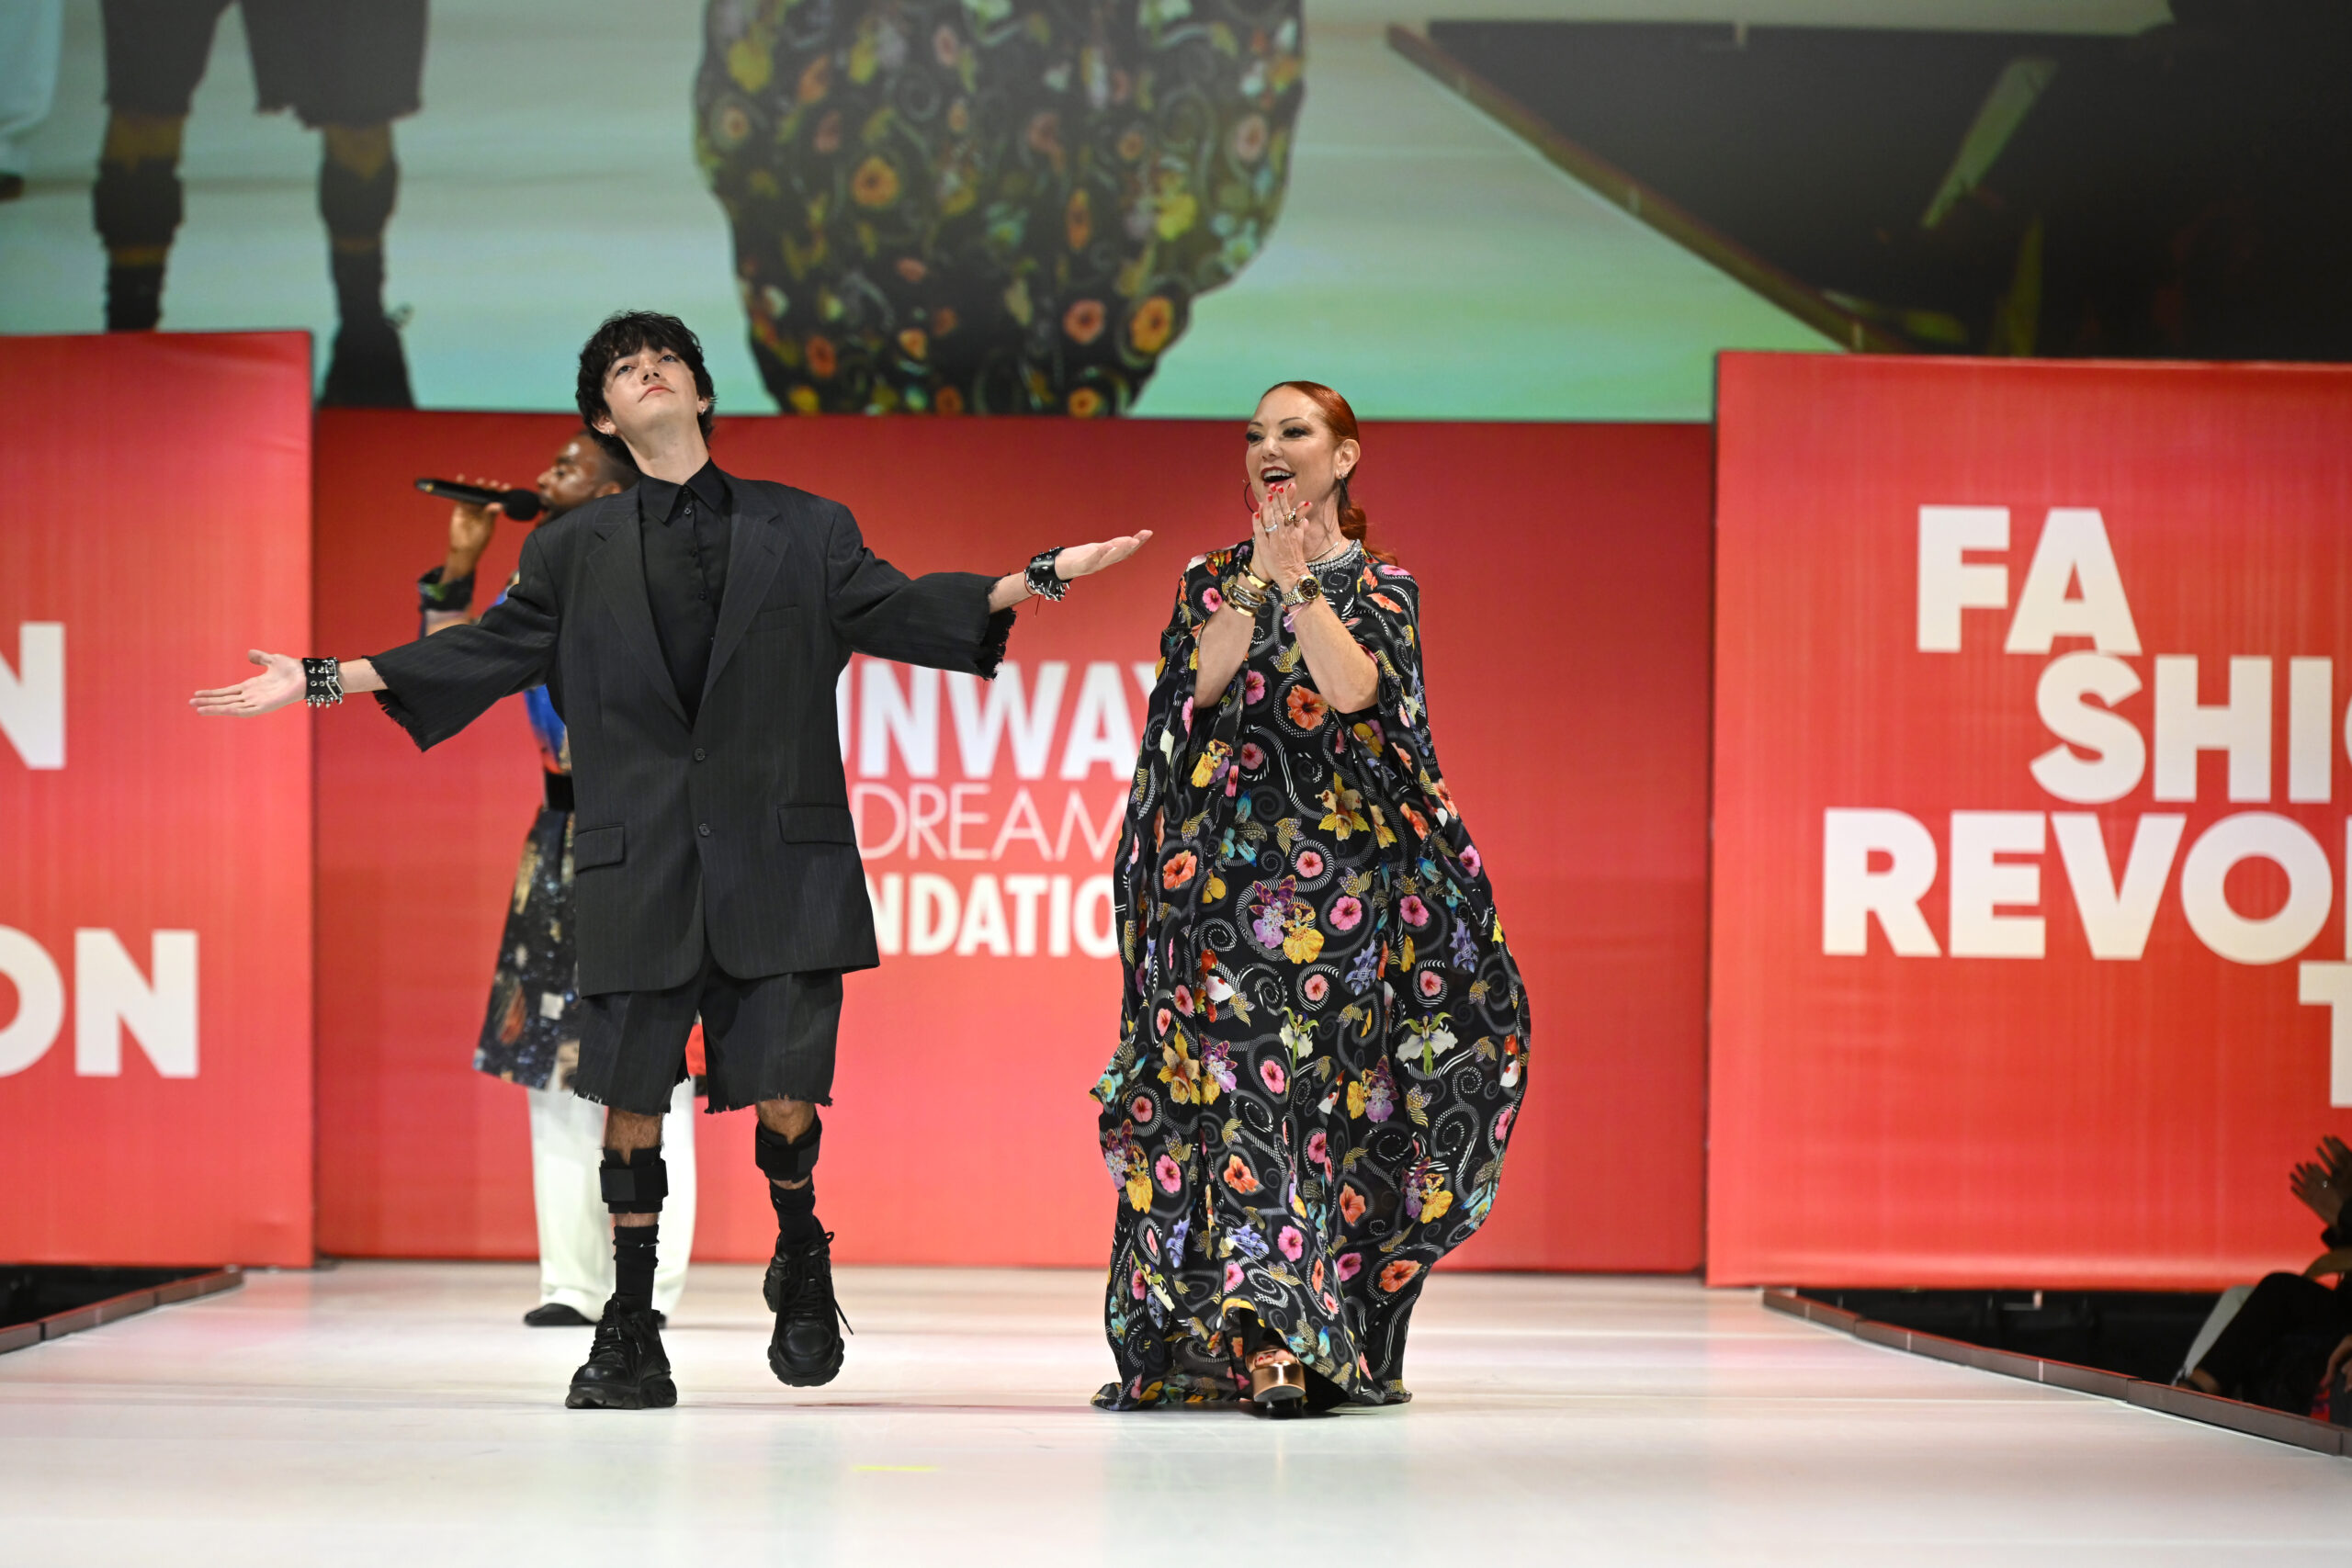 Oliver Scheier and Mindy Scheier greeting the audience from the runway.